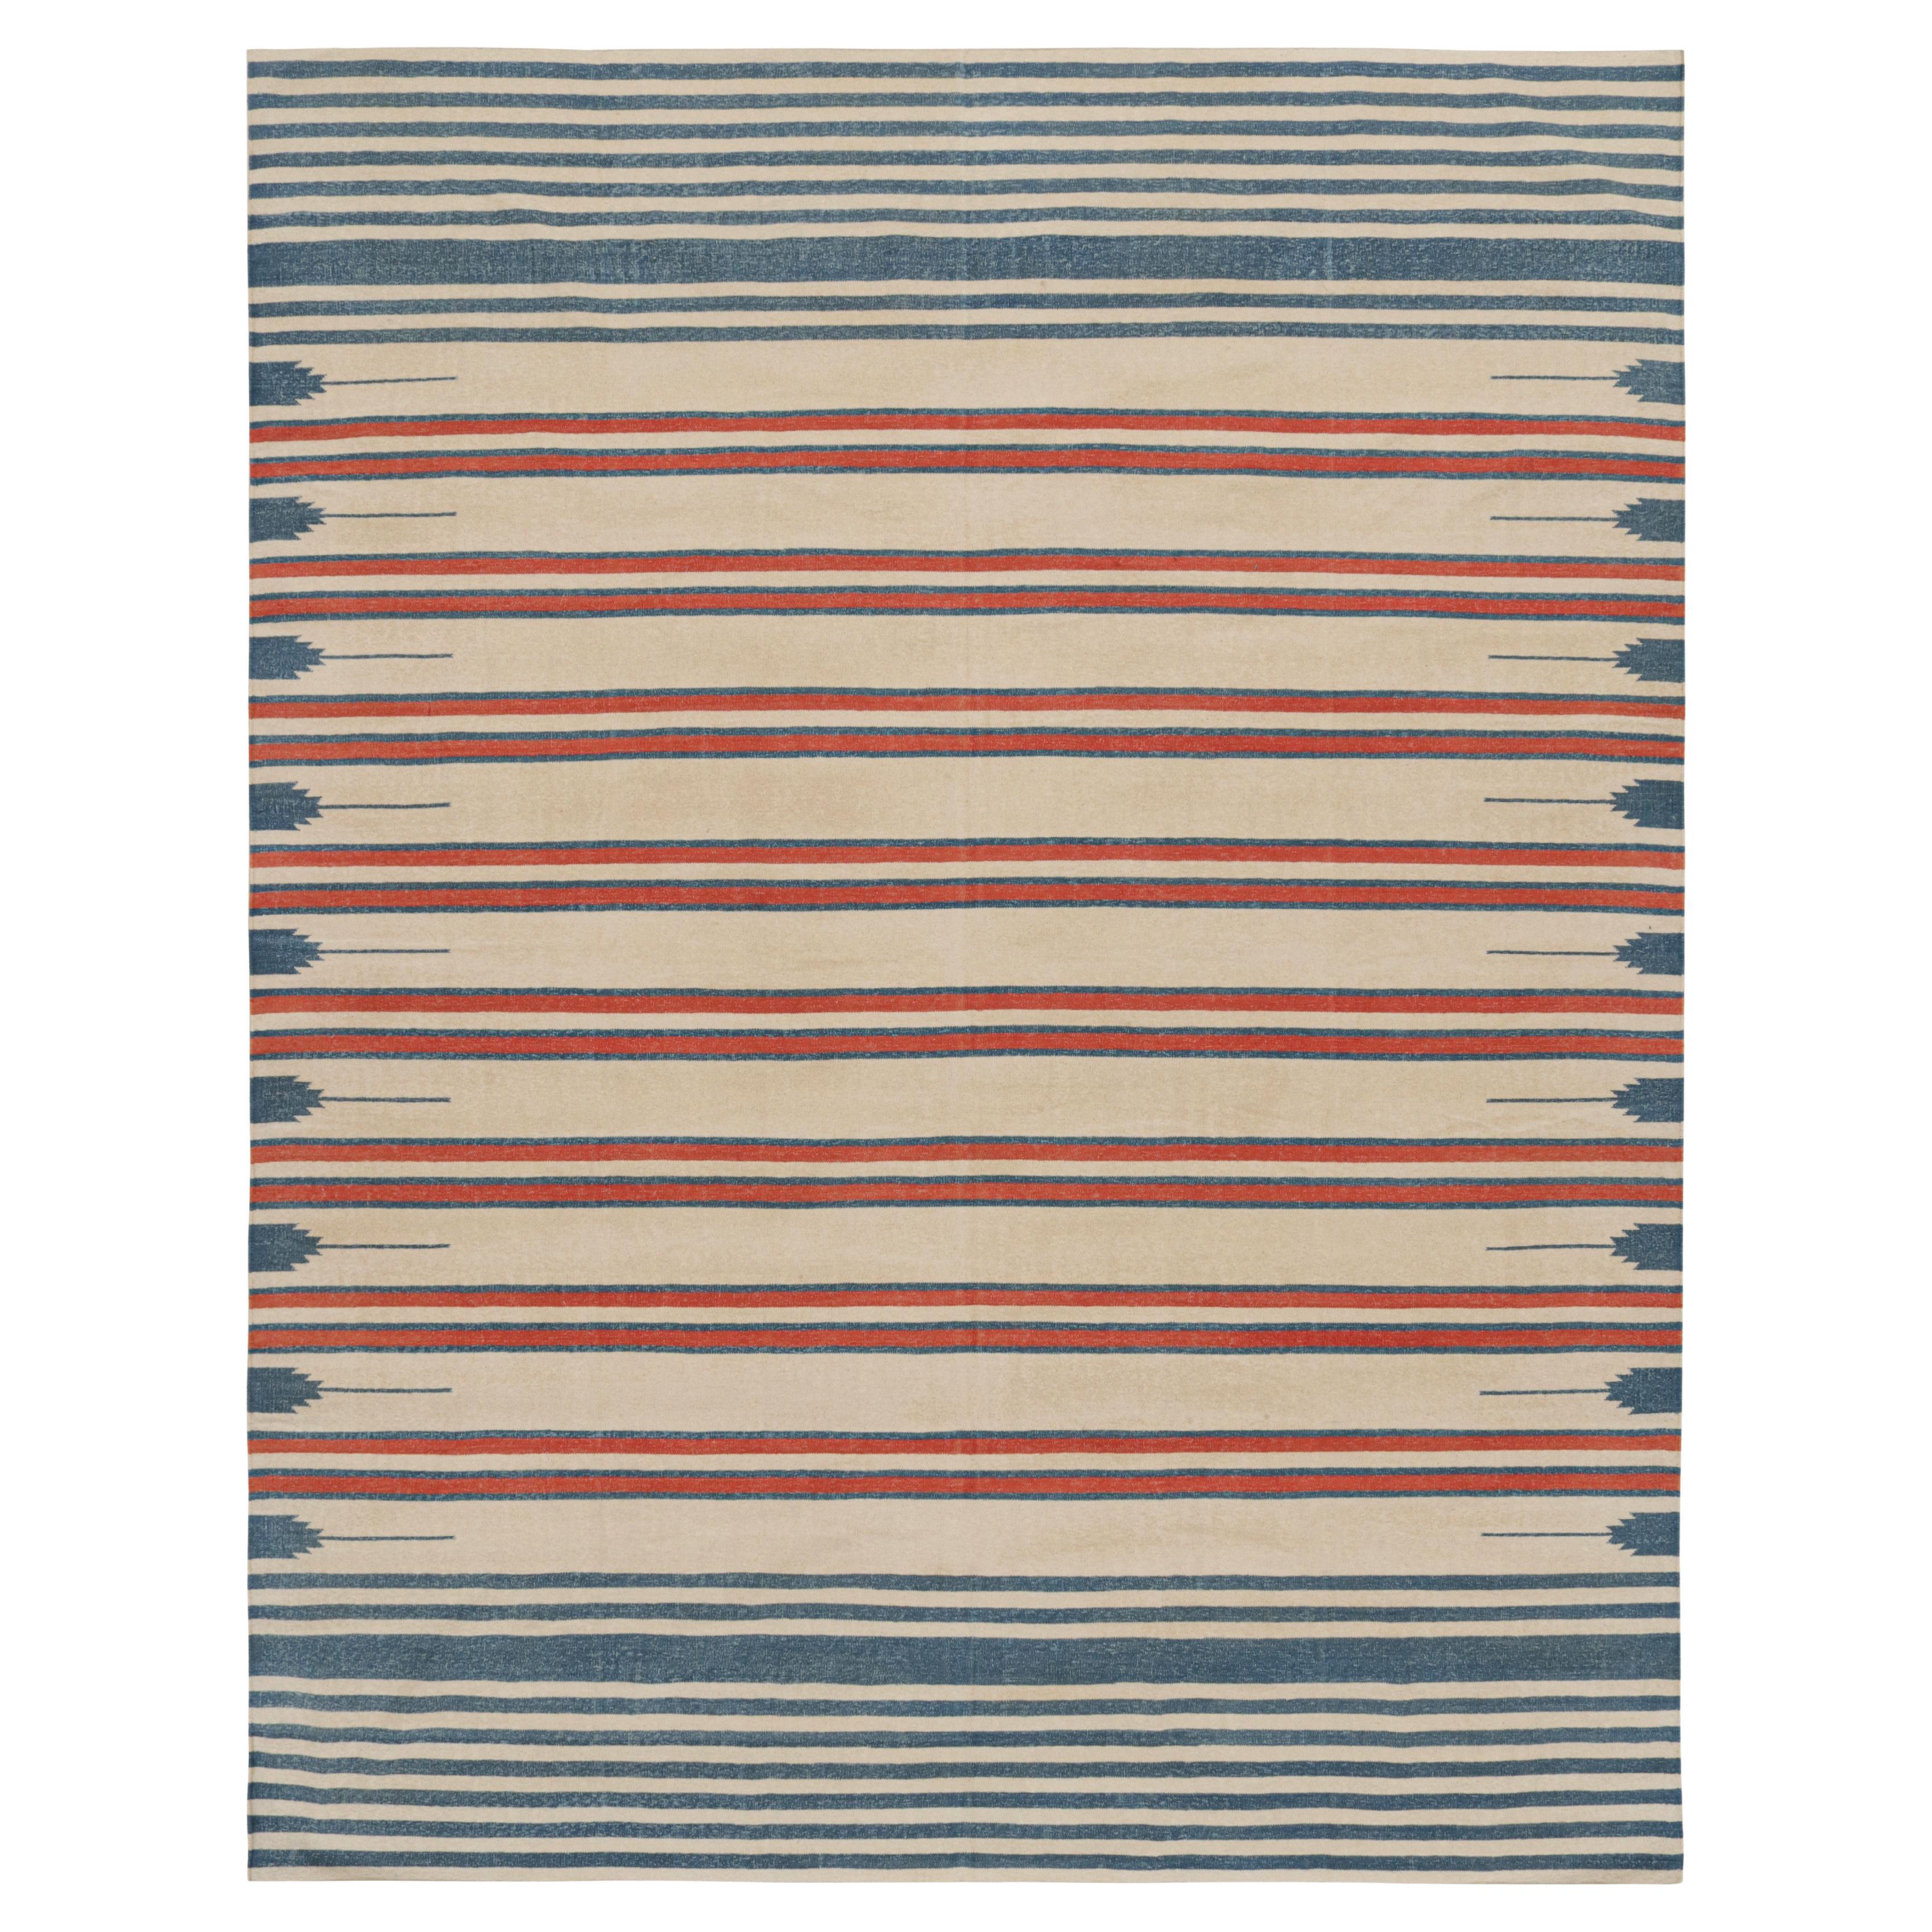 Rug & Kilim’s Contemporary Dhurrie Rug with Beige, Red, Blue Stripes Red Accents